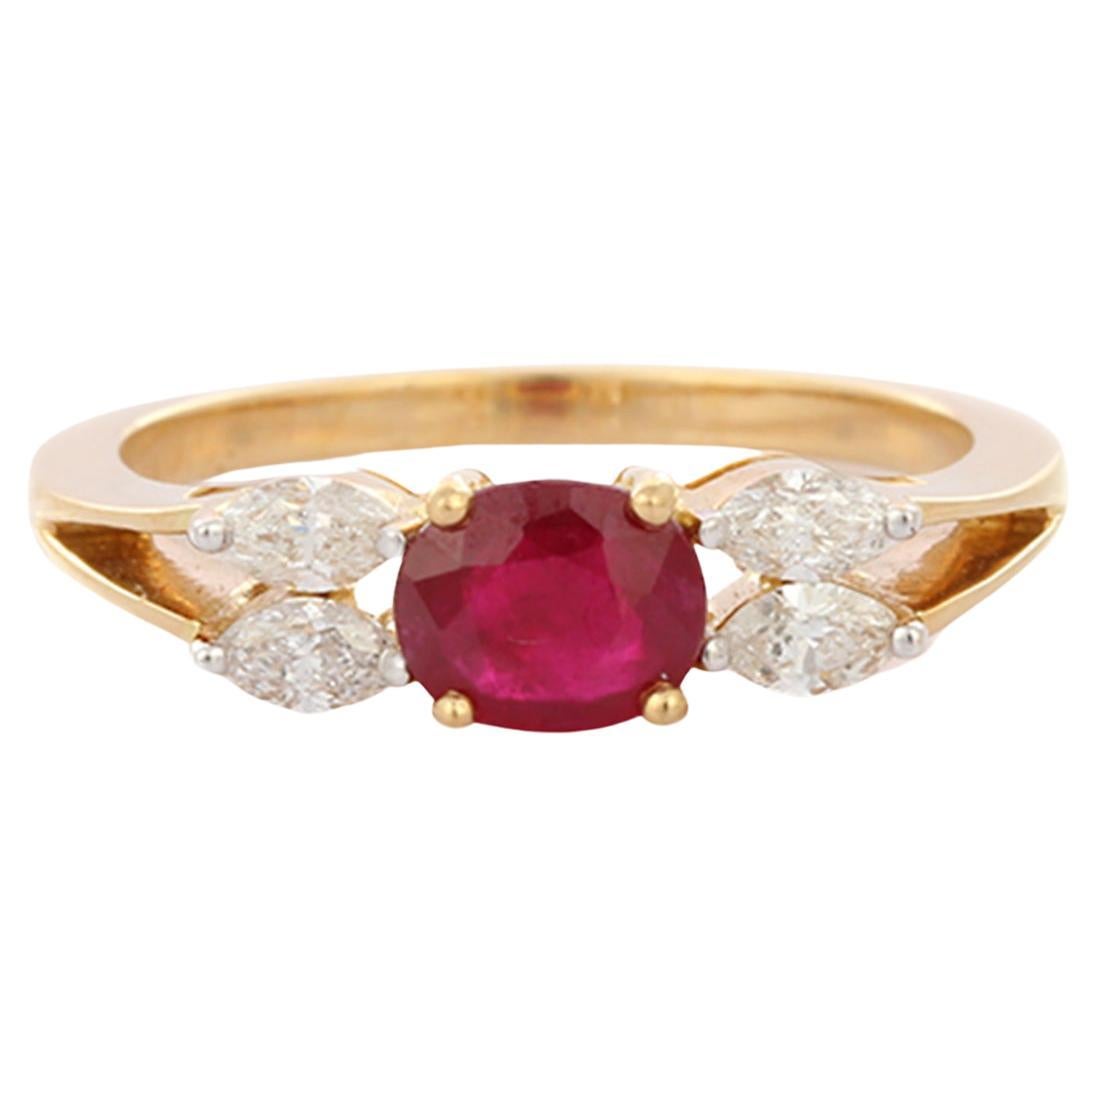 For Sale:  Astonishing Oval Cut Ruby Gemstone and Diamond Ring in 18K Solid Yellow Gold